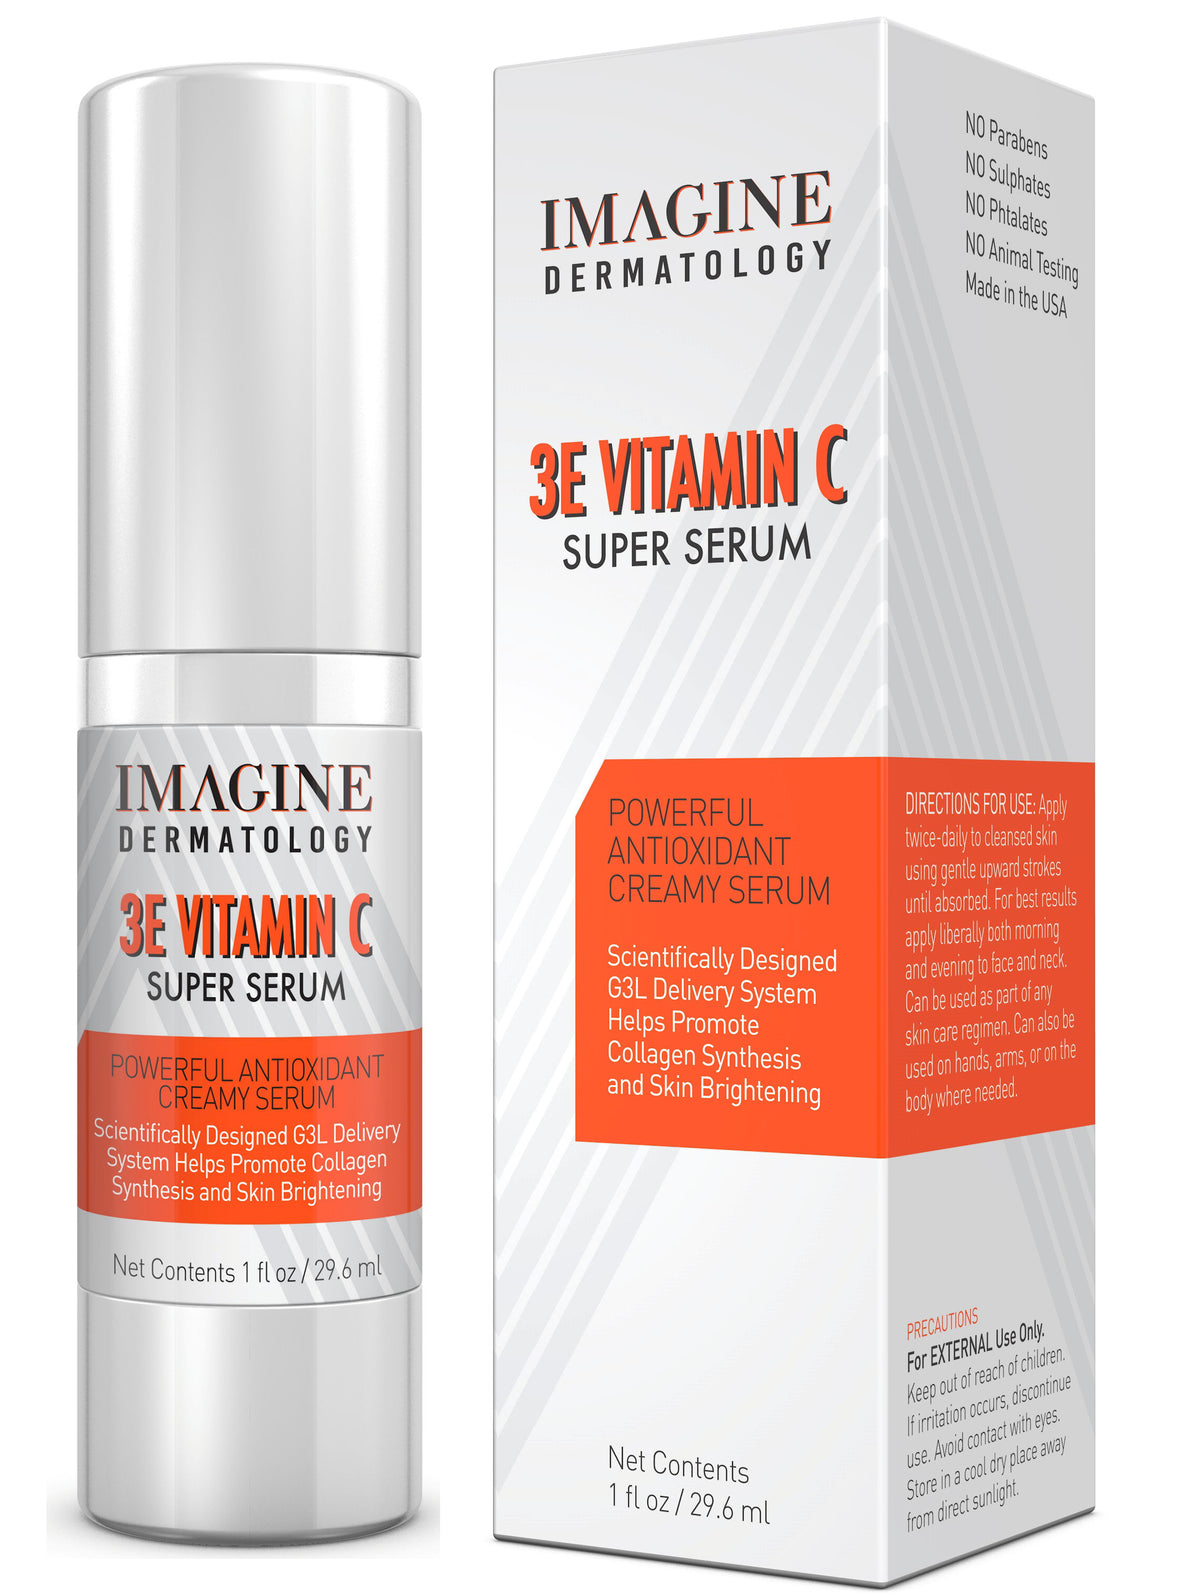 Whitening 3E Vitamin C Creamy Super Serum Anti Aging Intensive Treatment 1 fl oz/ 30 ml With Cutting Edge G3L Delivery System Brightens Skin, Evens Skin Tone, Great for Spots and Scars …